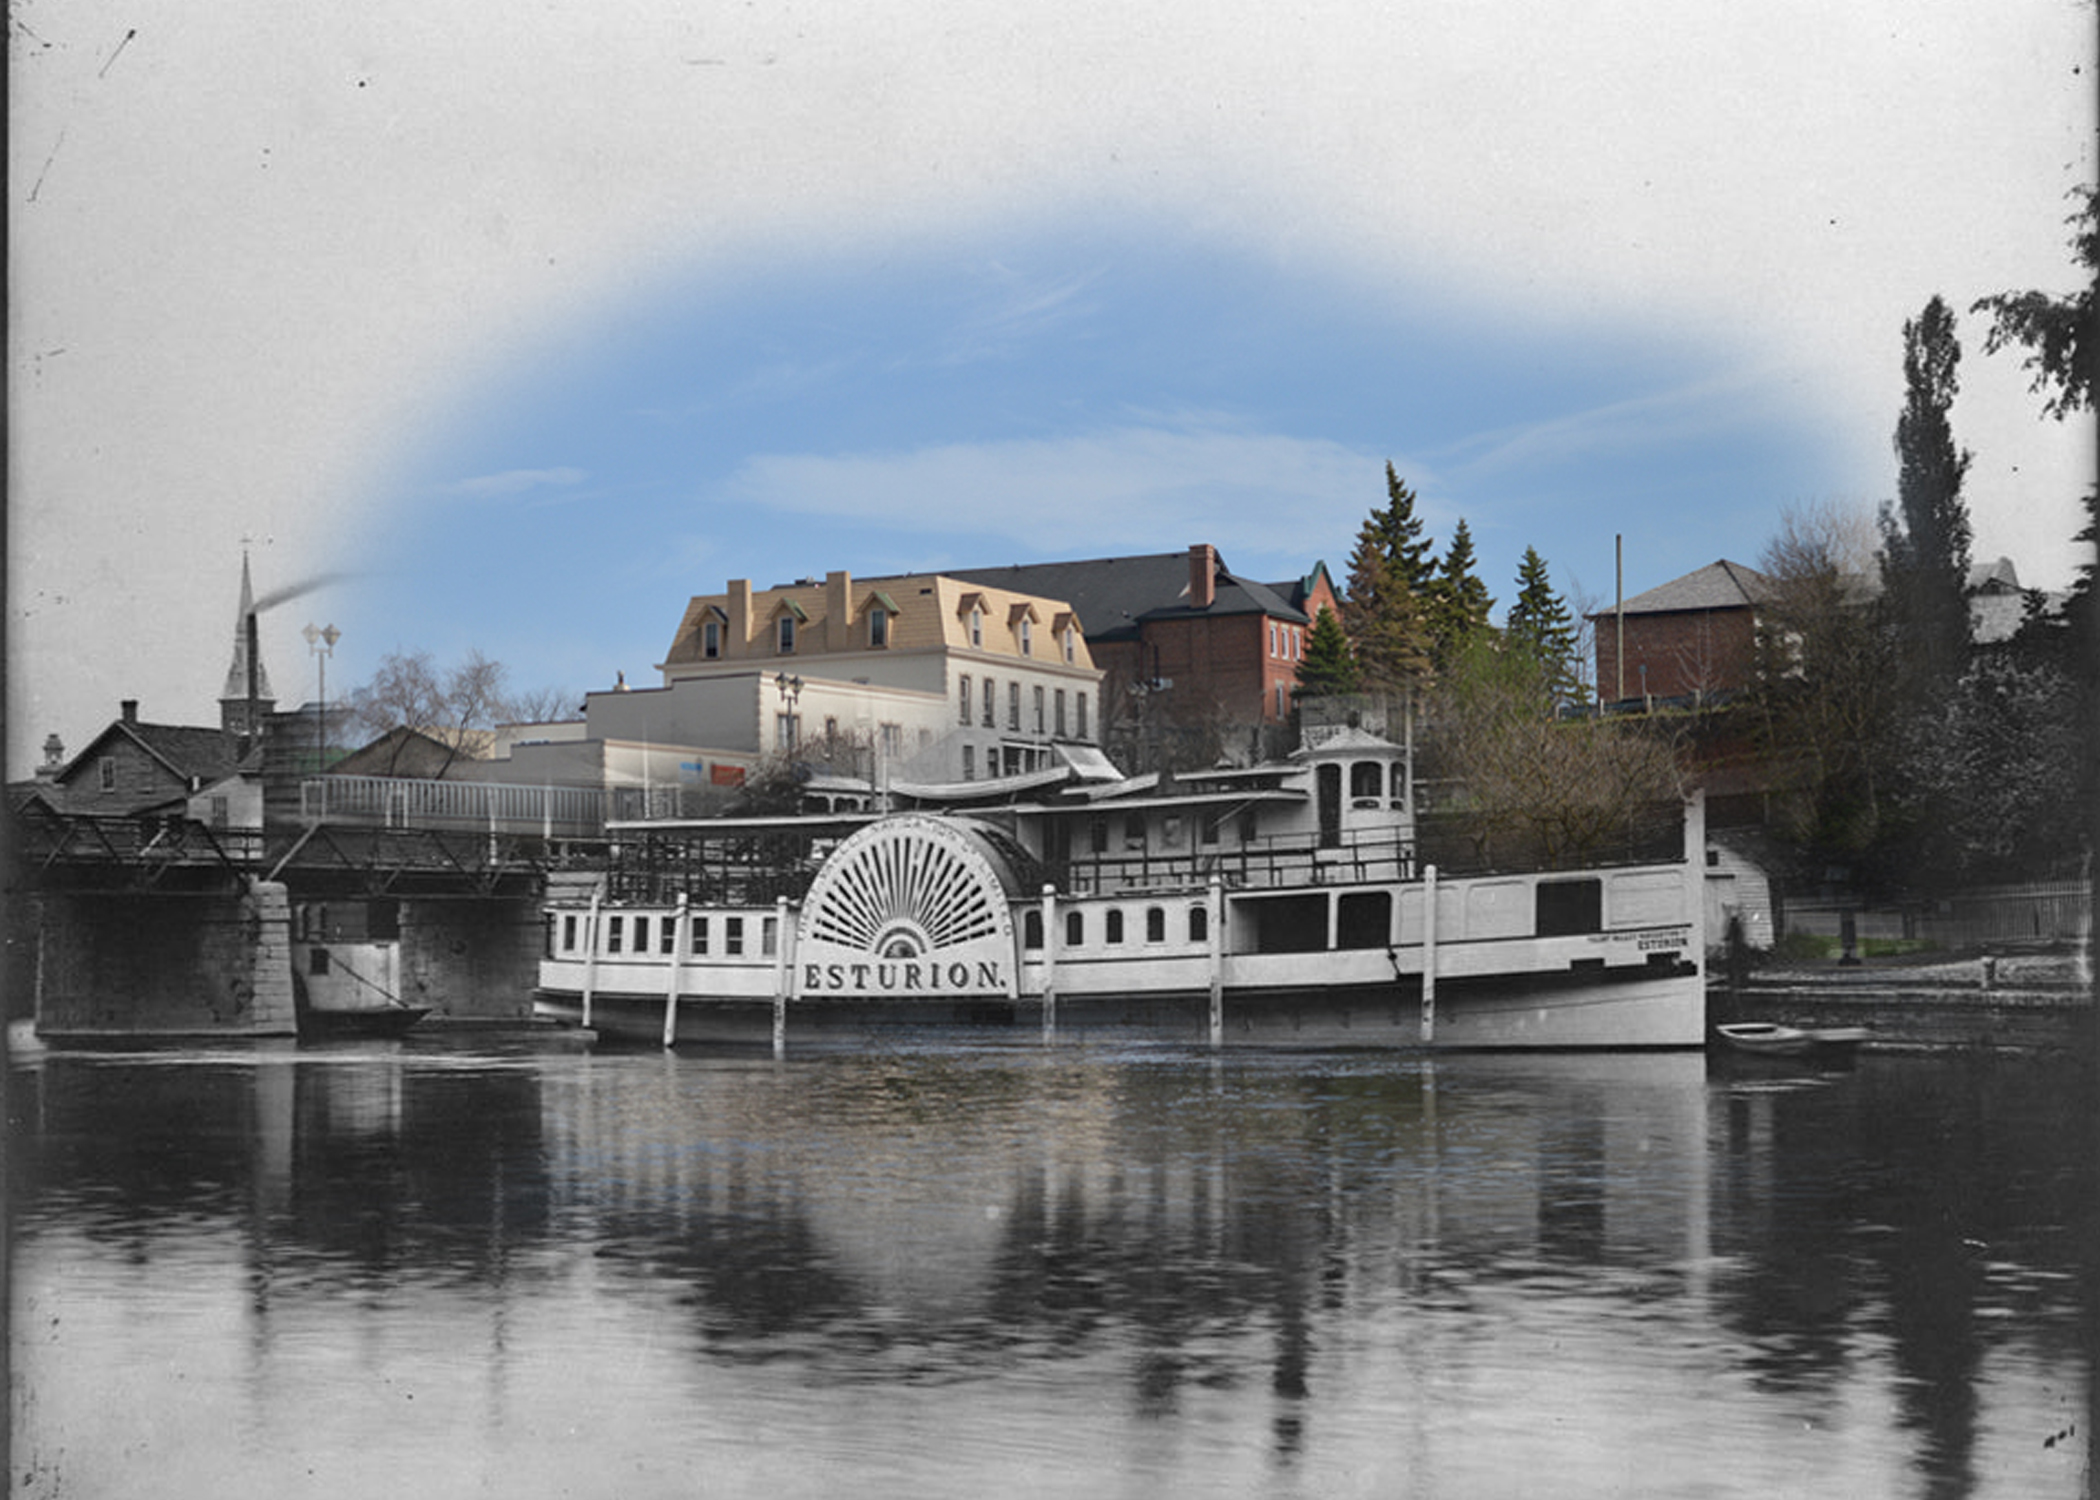 A black and white photograph of a steamboat superimposed on a contemporary image of a streetscape.